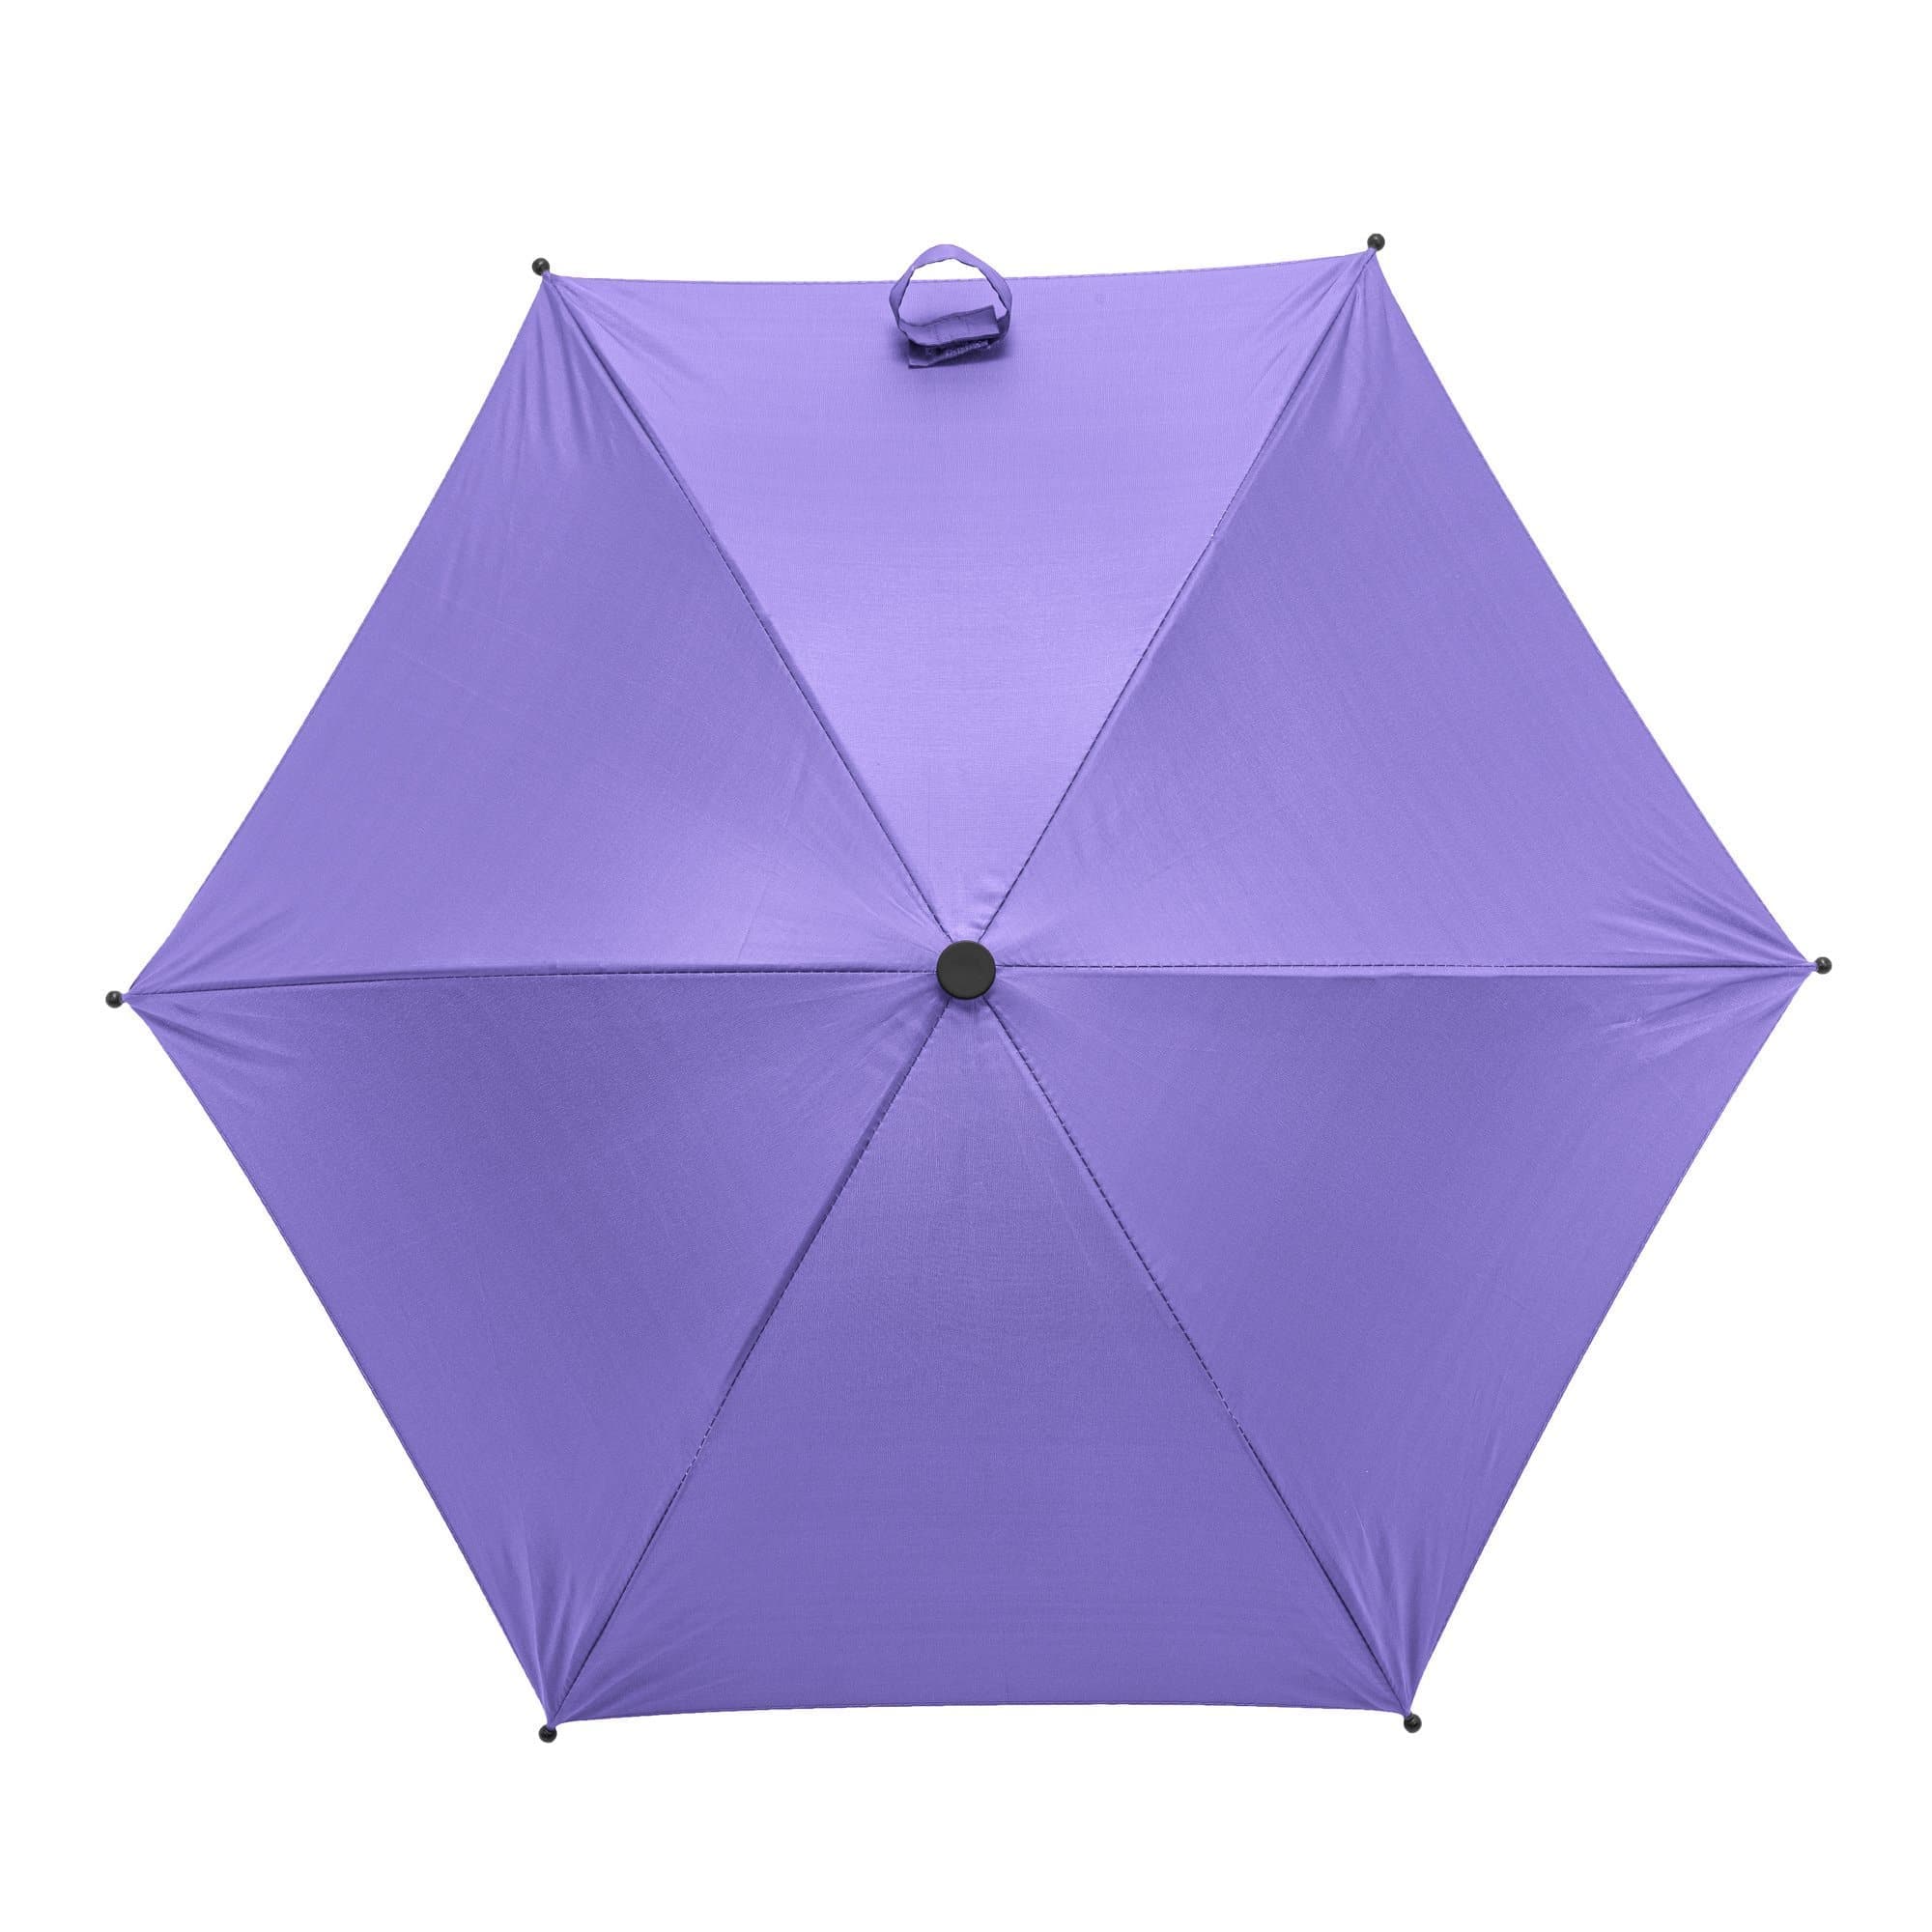 Baby Parasol Compatible With Bebe Confort - Fits All Models - For Your Little One